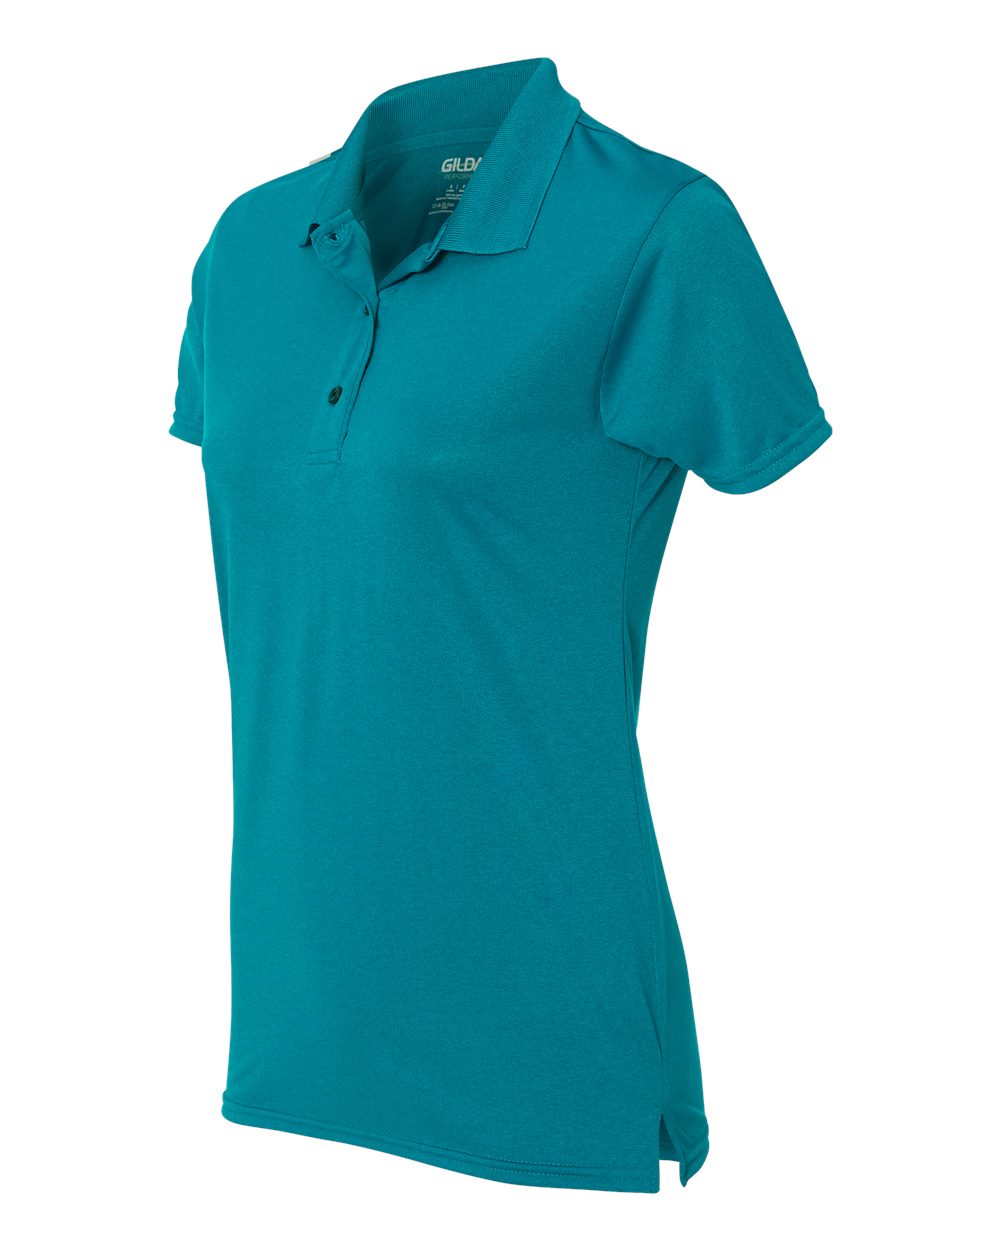 Gildan Performance® Women's Jersey Polo 44800L #color_Marbled Galapagos Blue